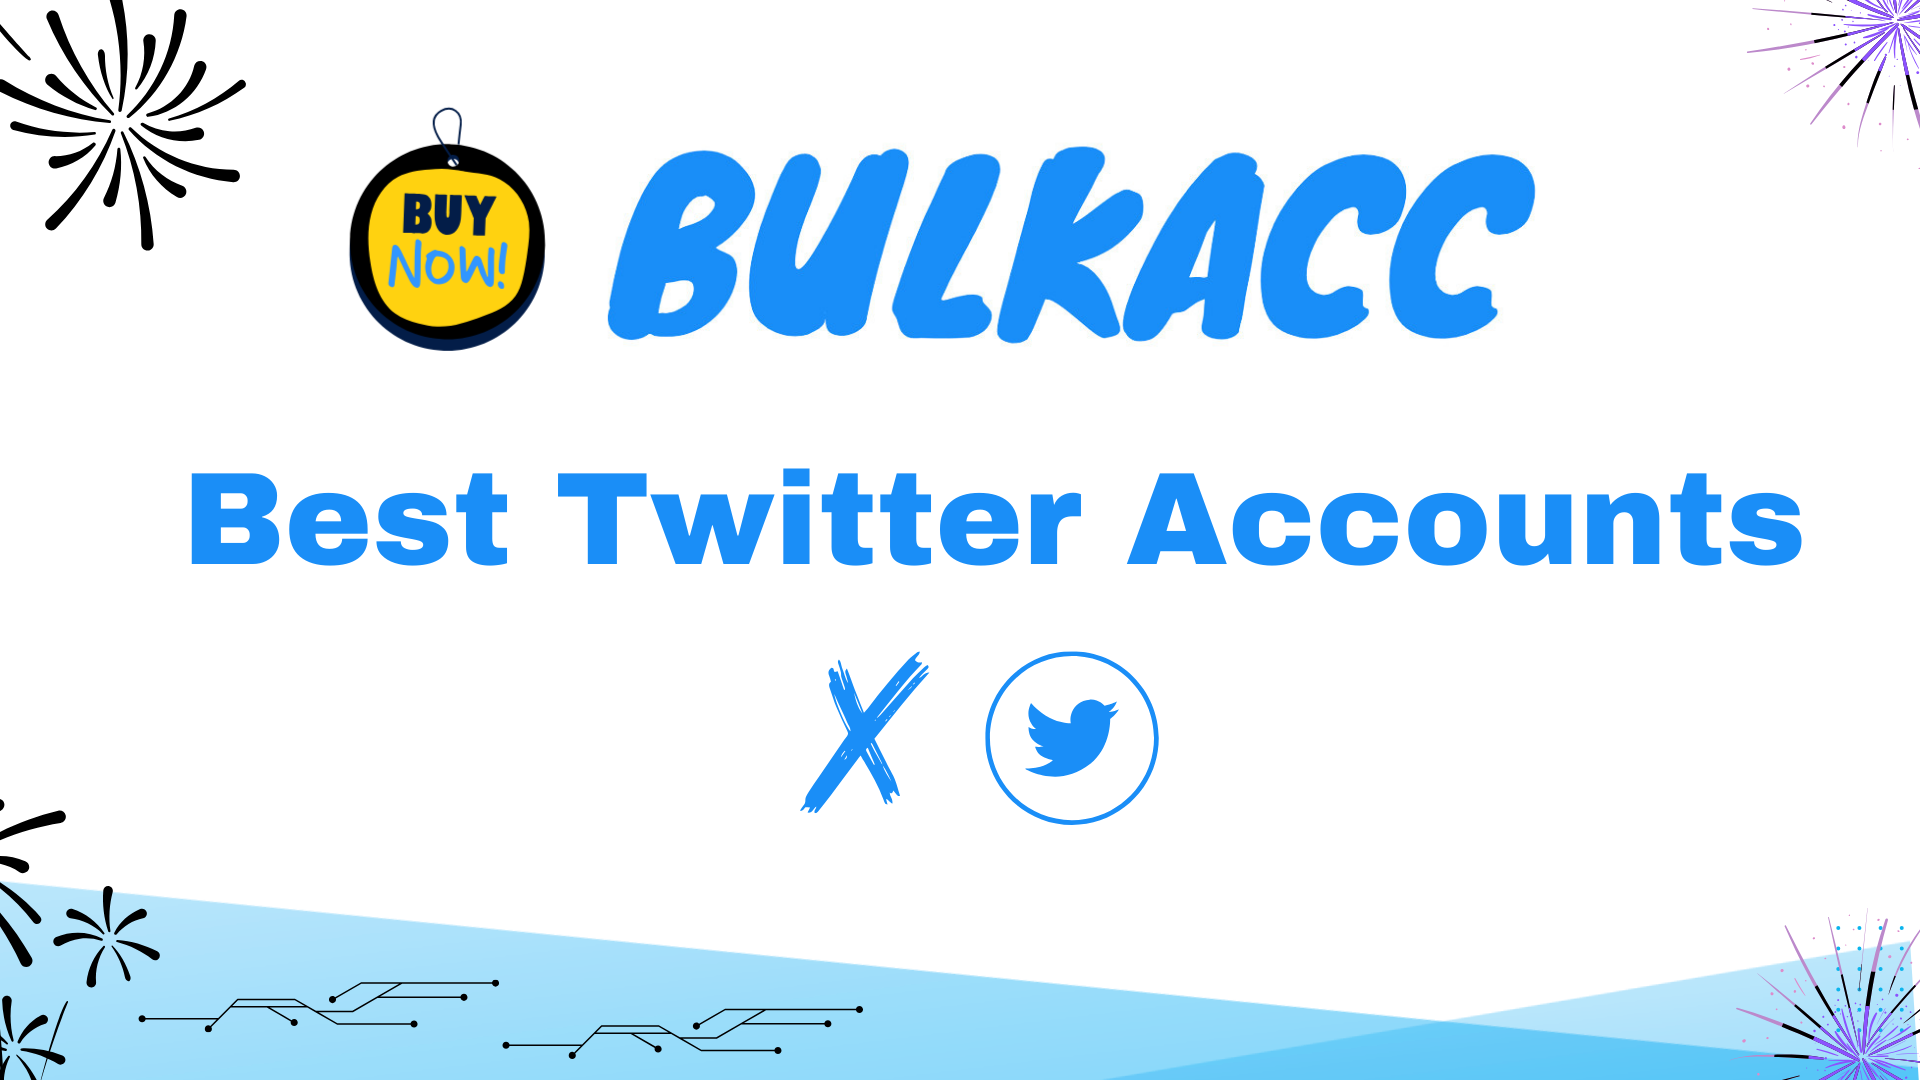 In this post, we'll explore why Twitter is crucial for sales and Bulkacc.com is your best source for high-quality Twitter accounts and ways to  use Twitter accounts to develop your business.